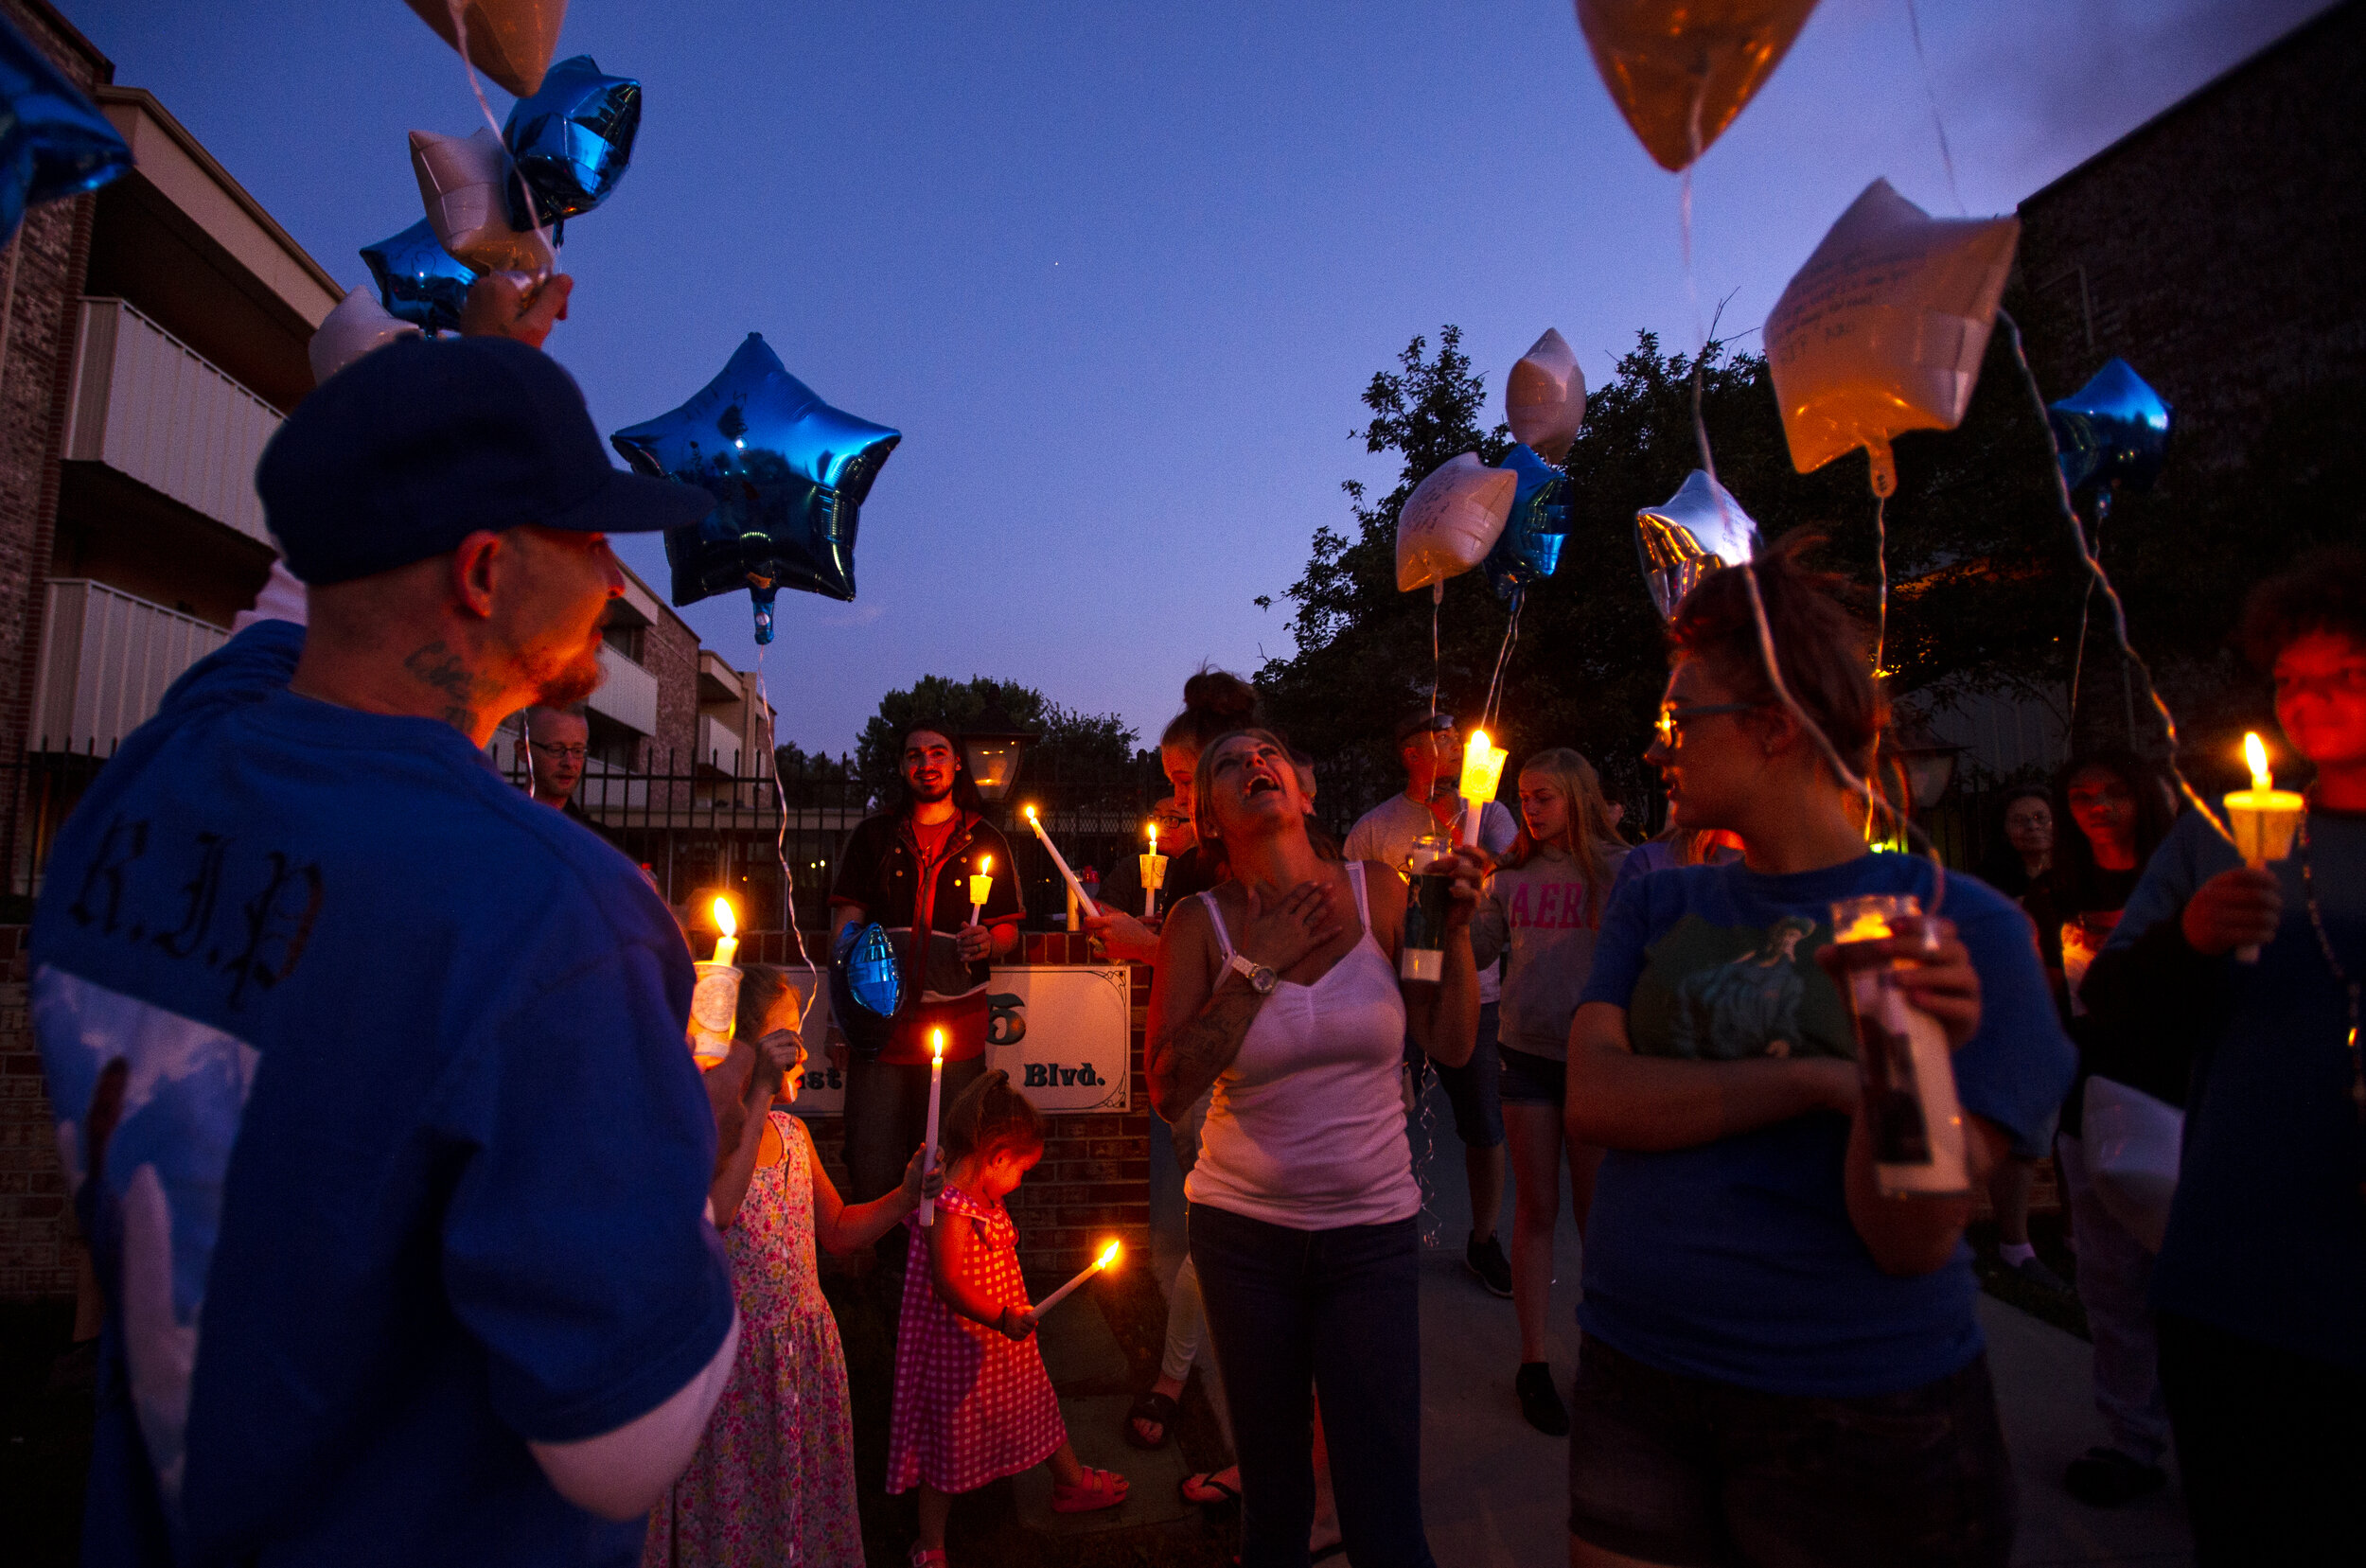  Friends and family of Joshua Vigil gather at the Fountain Garden Apartment complex in Colorado Springs, Colo., and join in song before releasing blue and white balloons in remembrance of him. Vigil was shot by Colorado Springs police officers at the